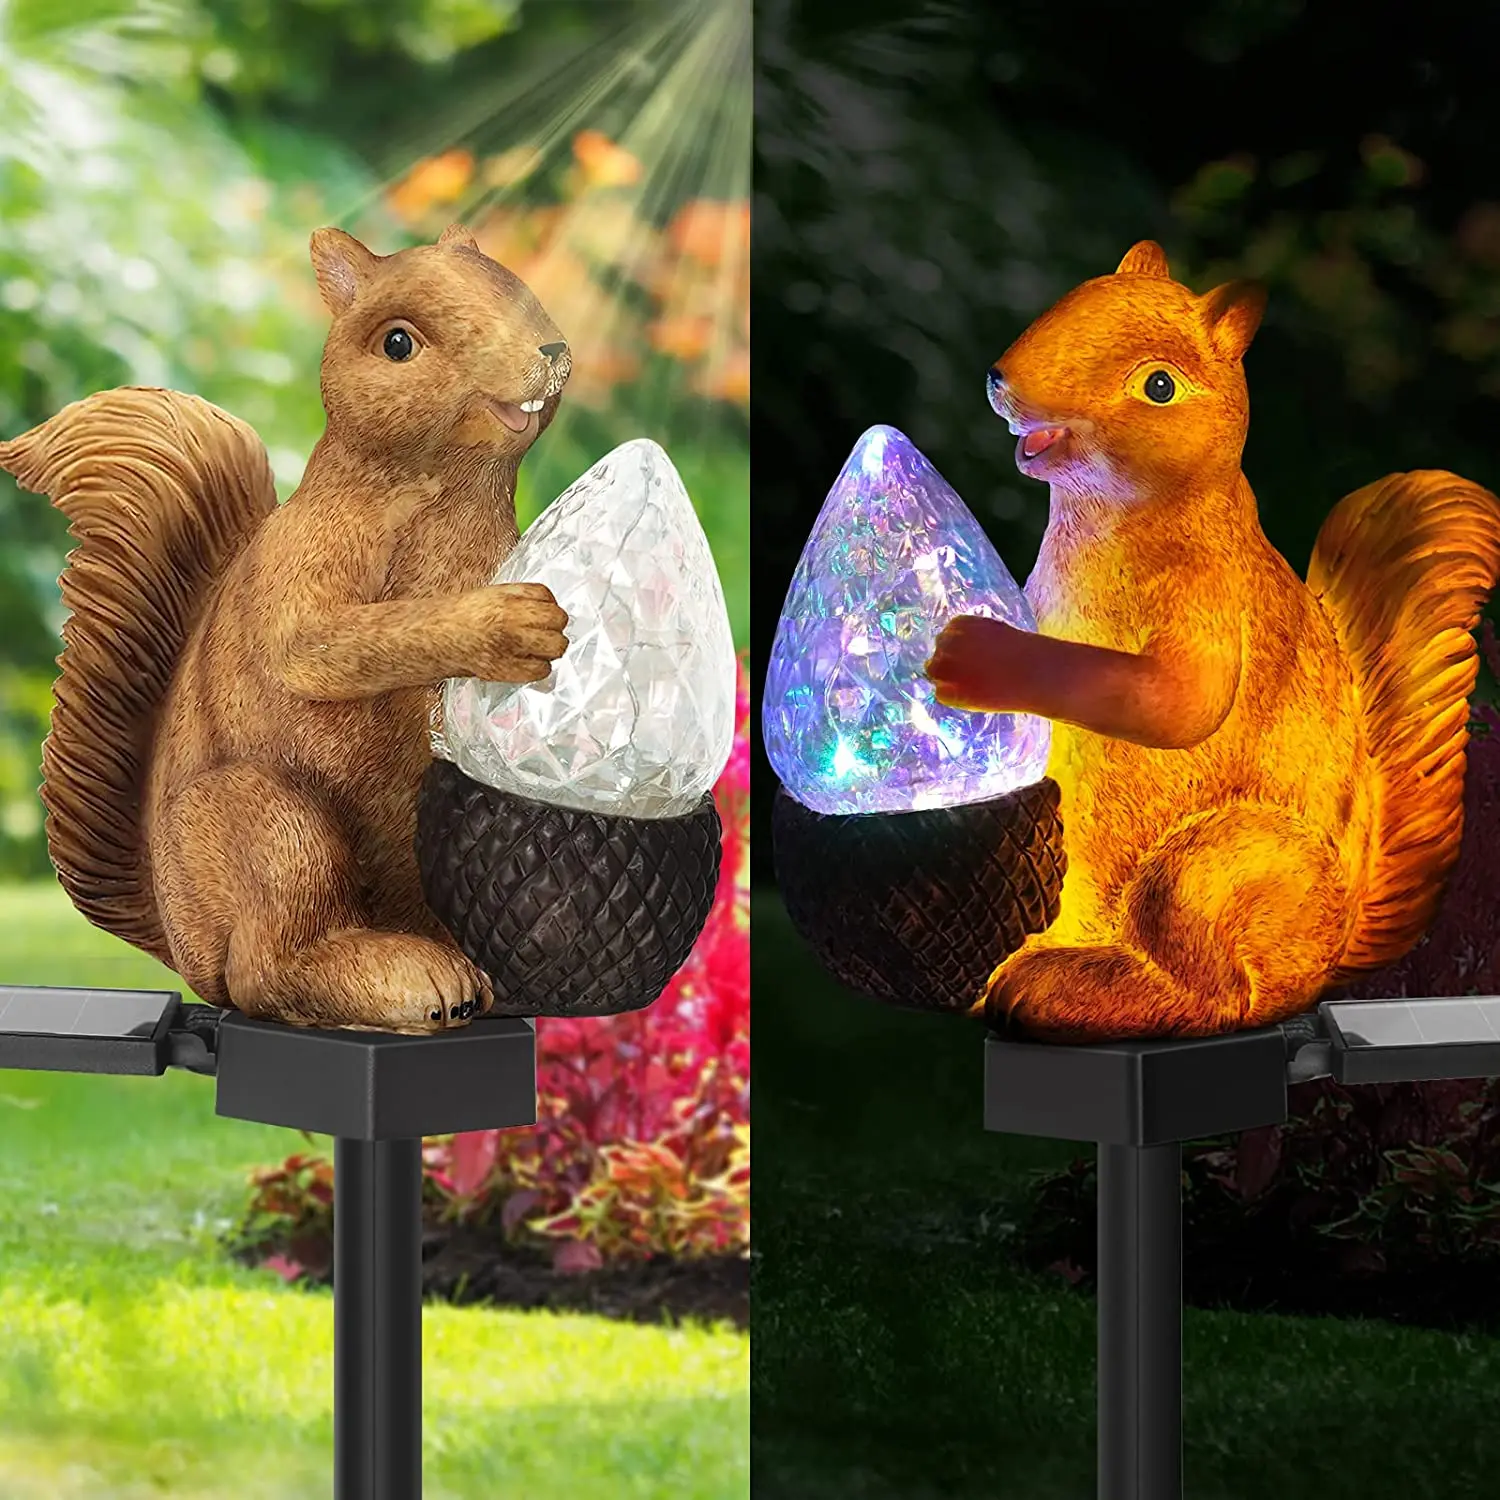 Ed led light outdoor decorative figurine lamp cute squirrel holding nut statue for yard thumb200